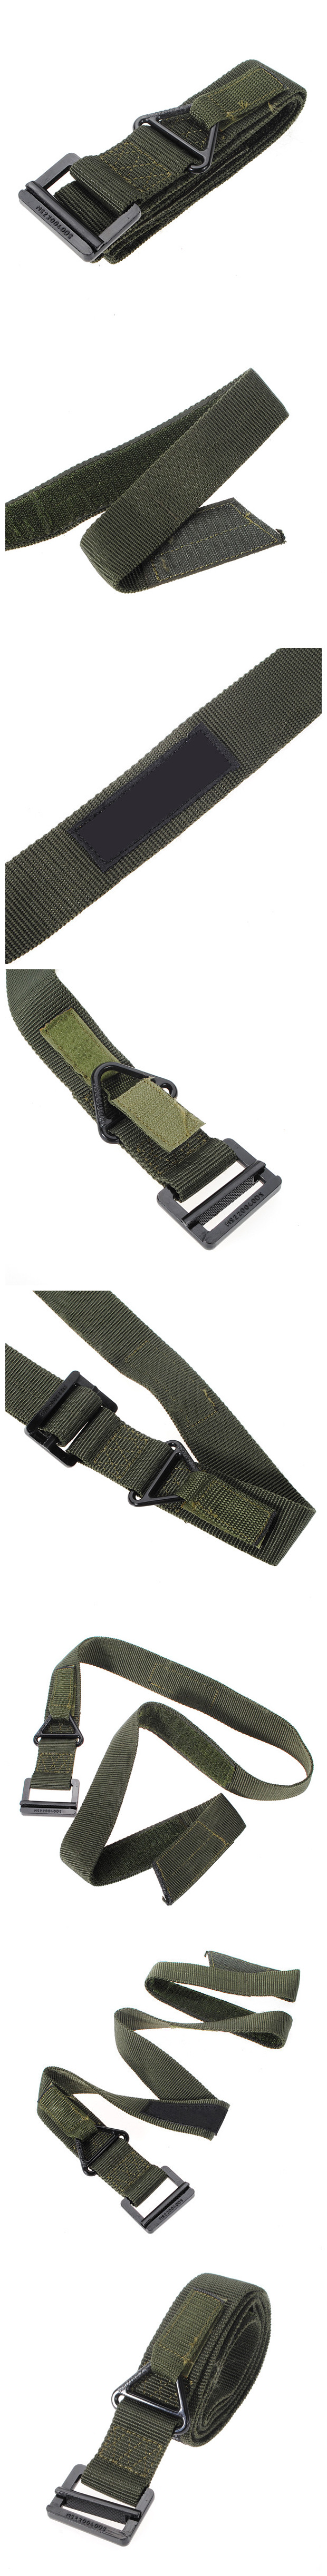 KALOAD-Survival-Tactical-Waist-Belt-Strap-Military-Emergency-Rescue-Protection-Waistband-For-Hunting-62888-4